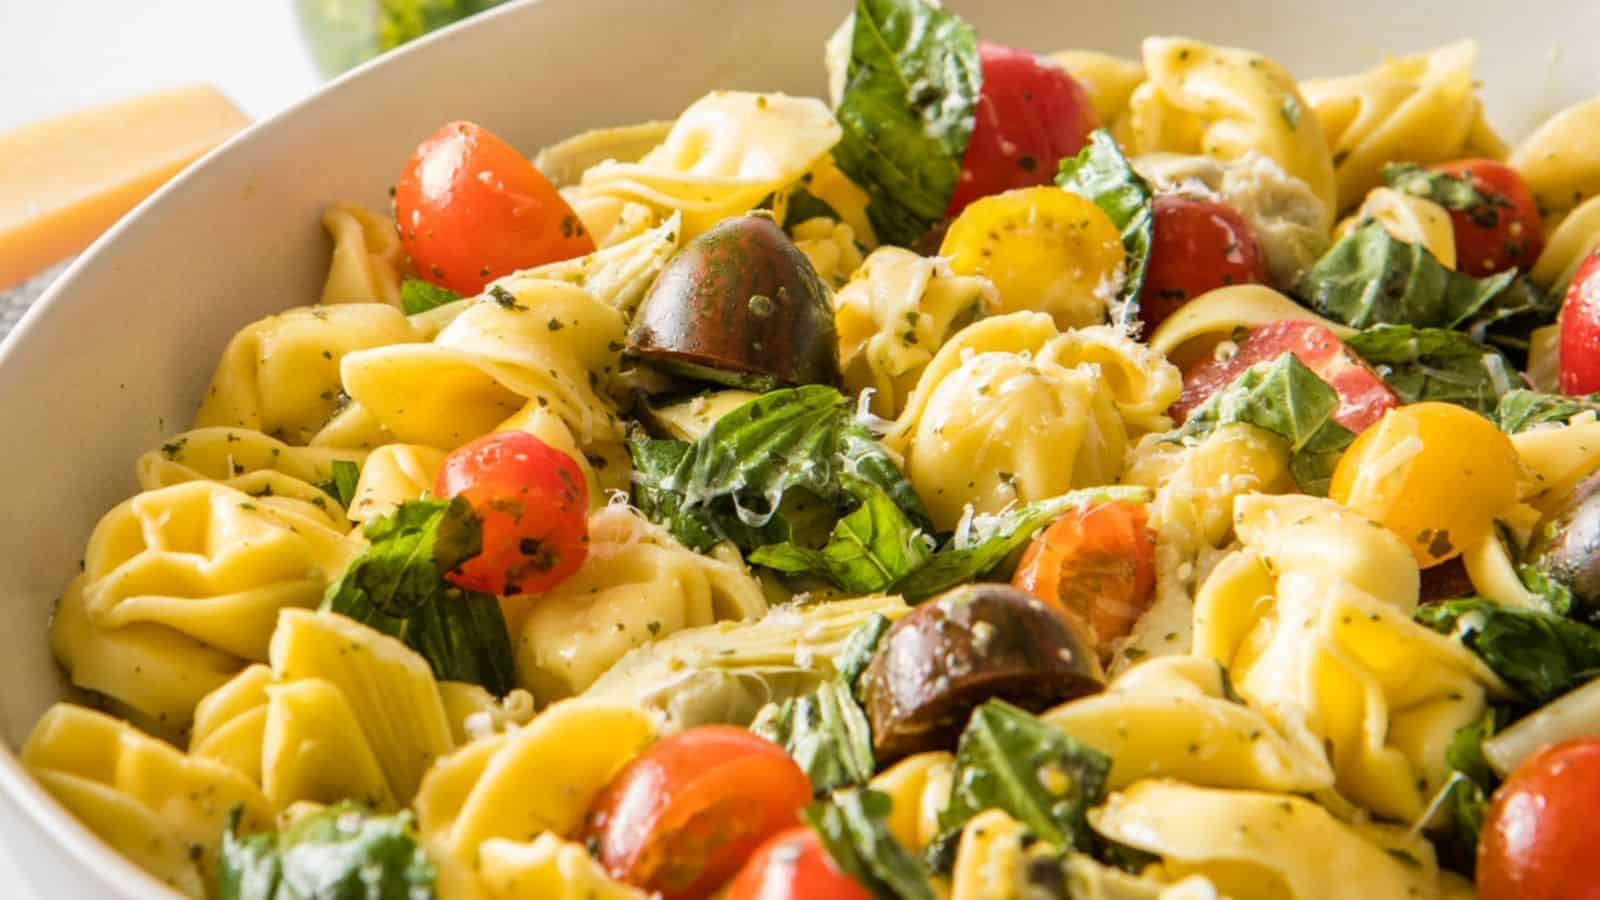 A close up view of cooked tortellini pasta salad in a white bowl.